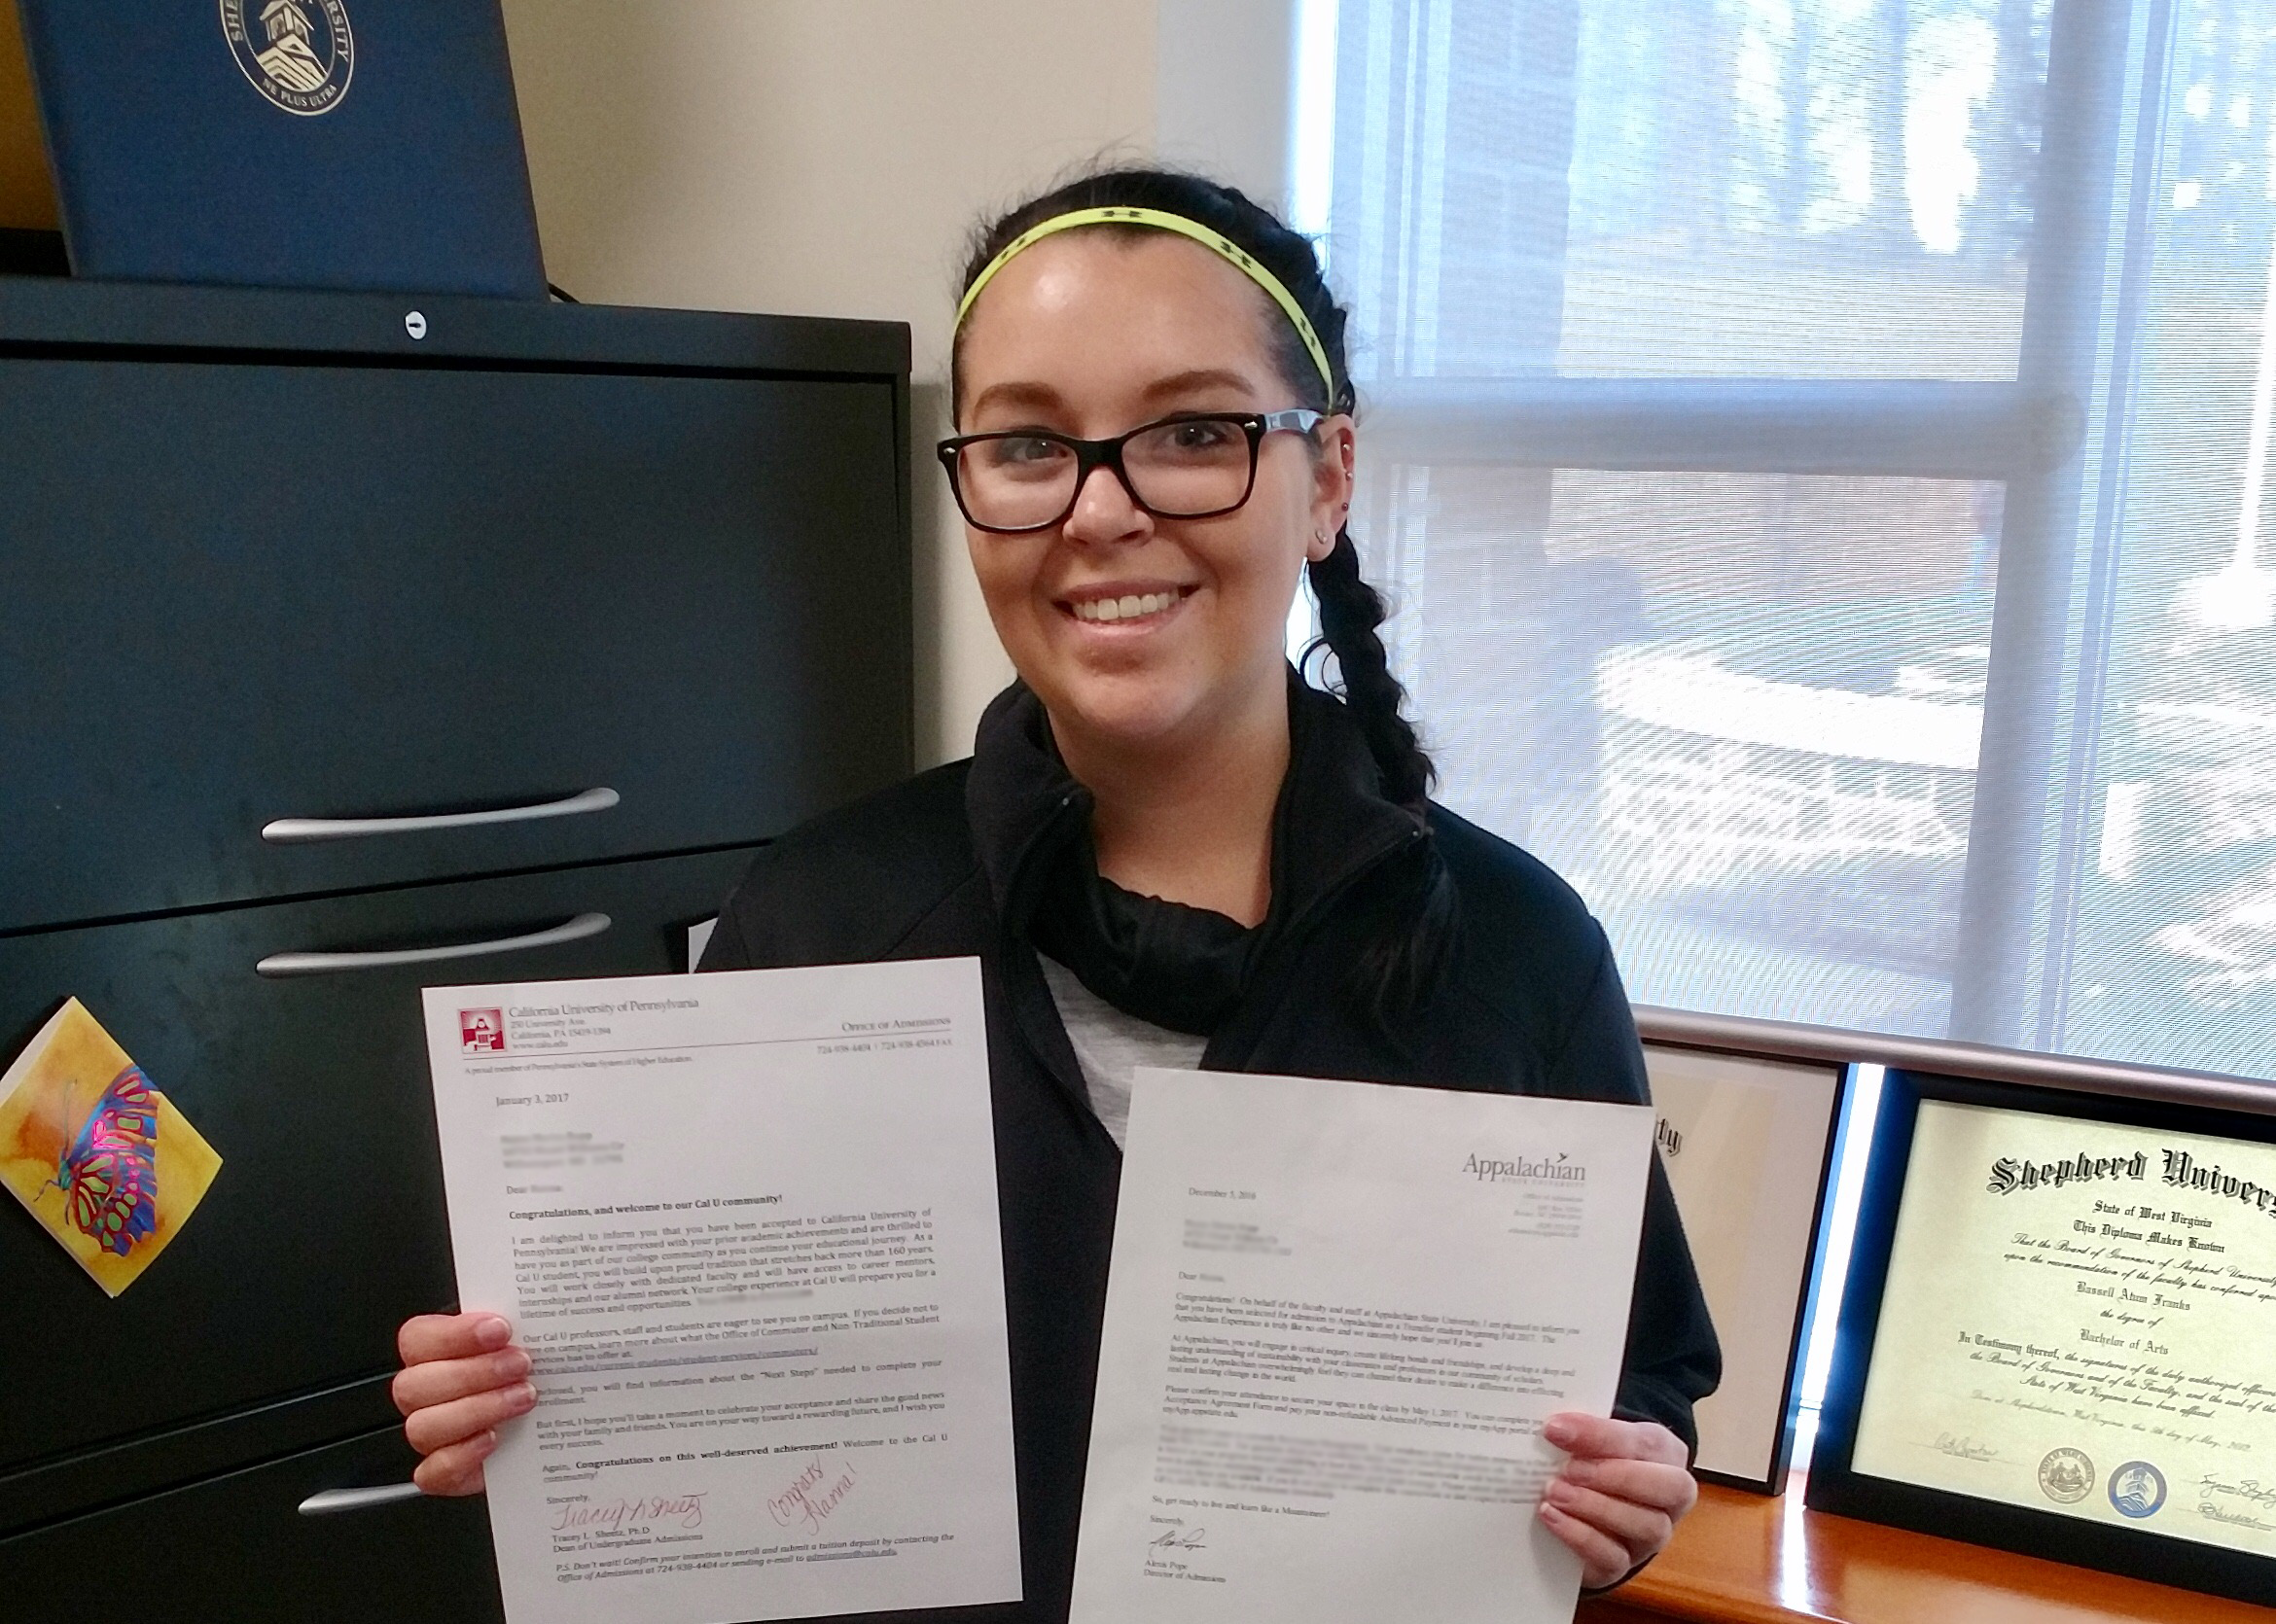 Hanna Rupp with acceptance letter